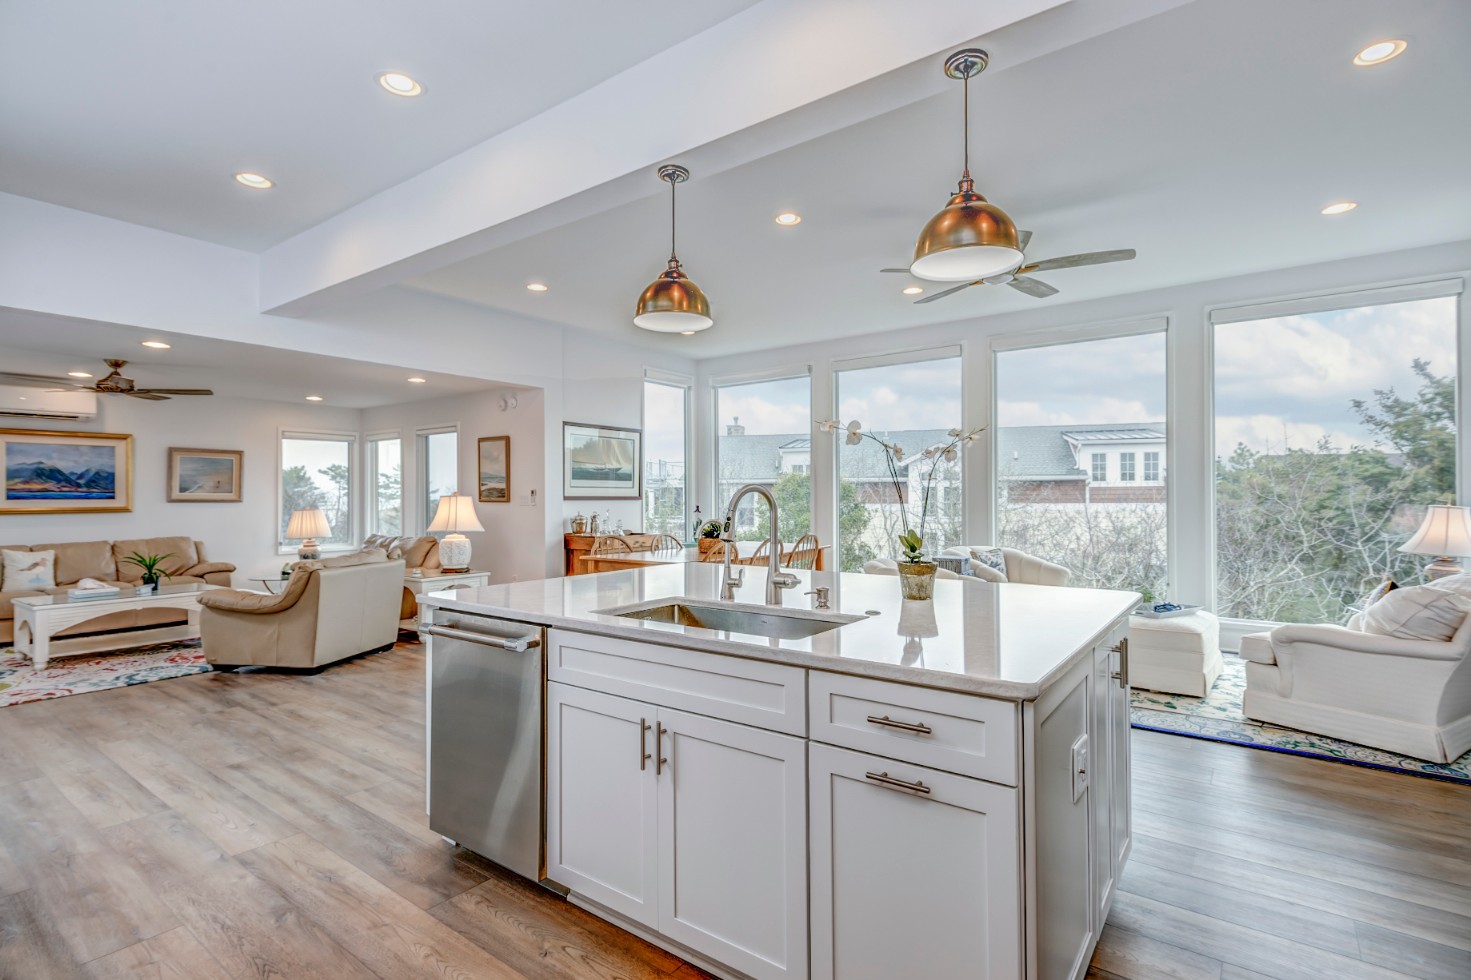 Cotton Patch Hills Renovation in Bethany Beach DE - Great Room with White Kitchen Island